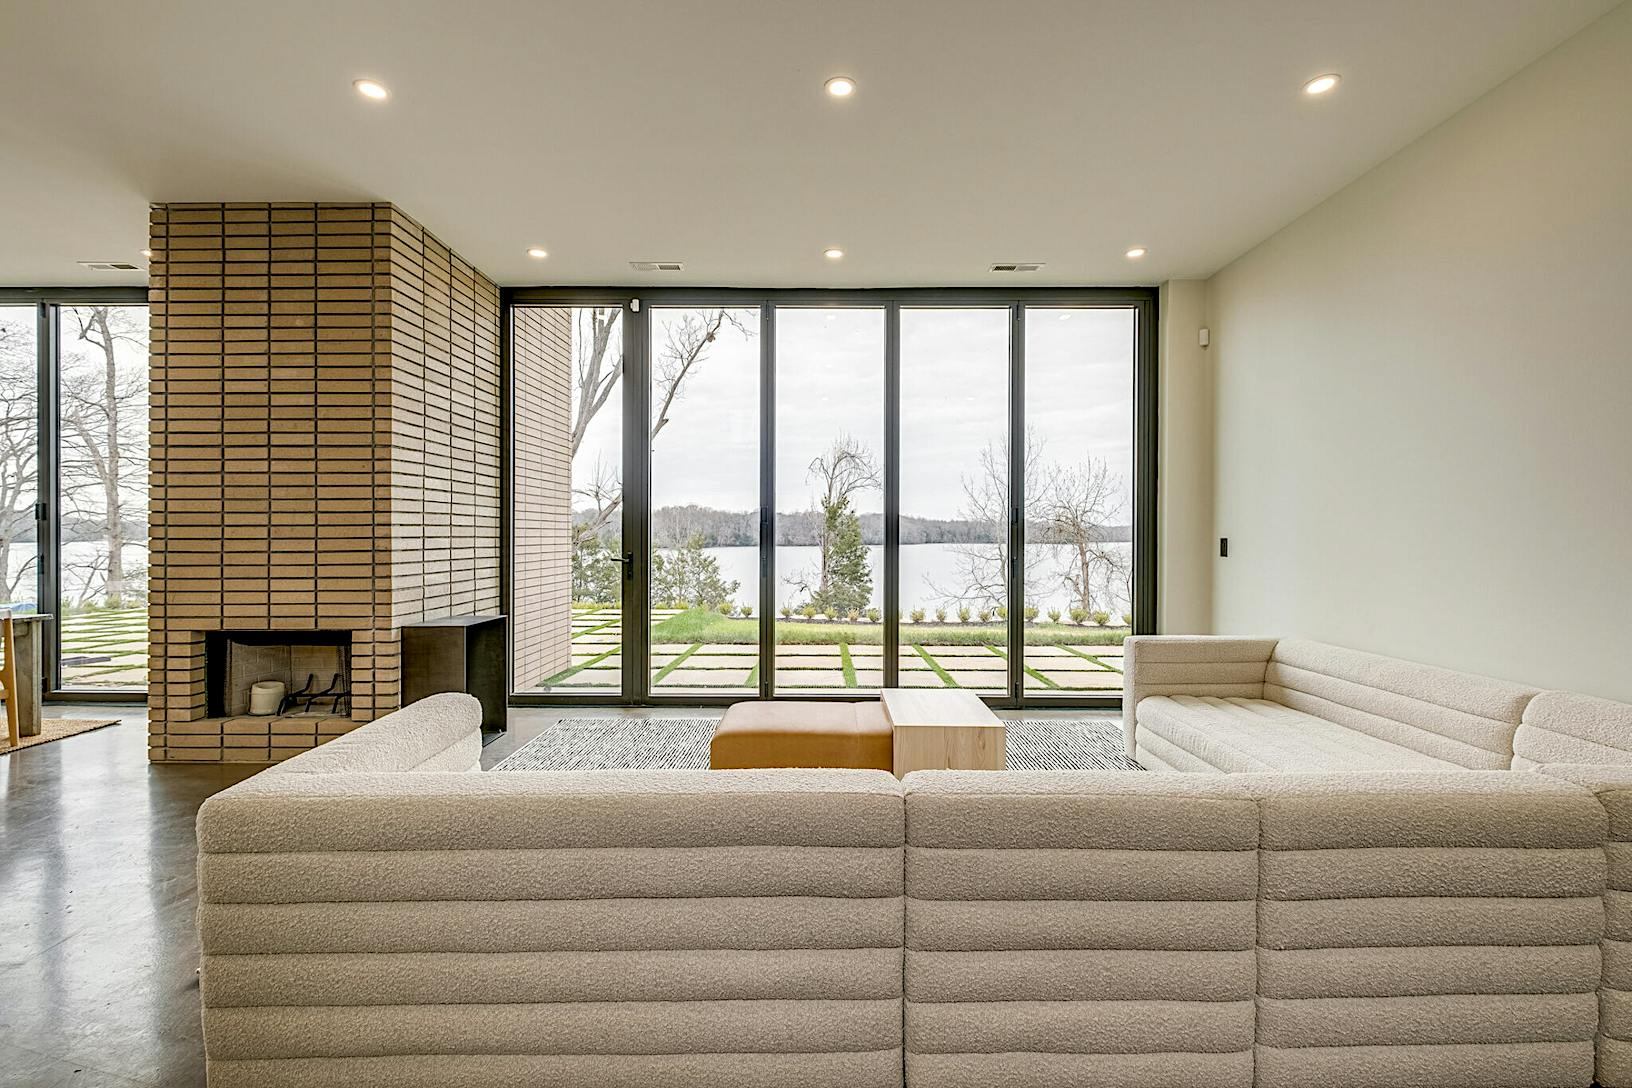 Modern living room with large windows and glass wall panels providing a view of an outdoor landscape.